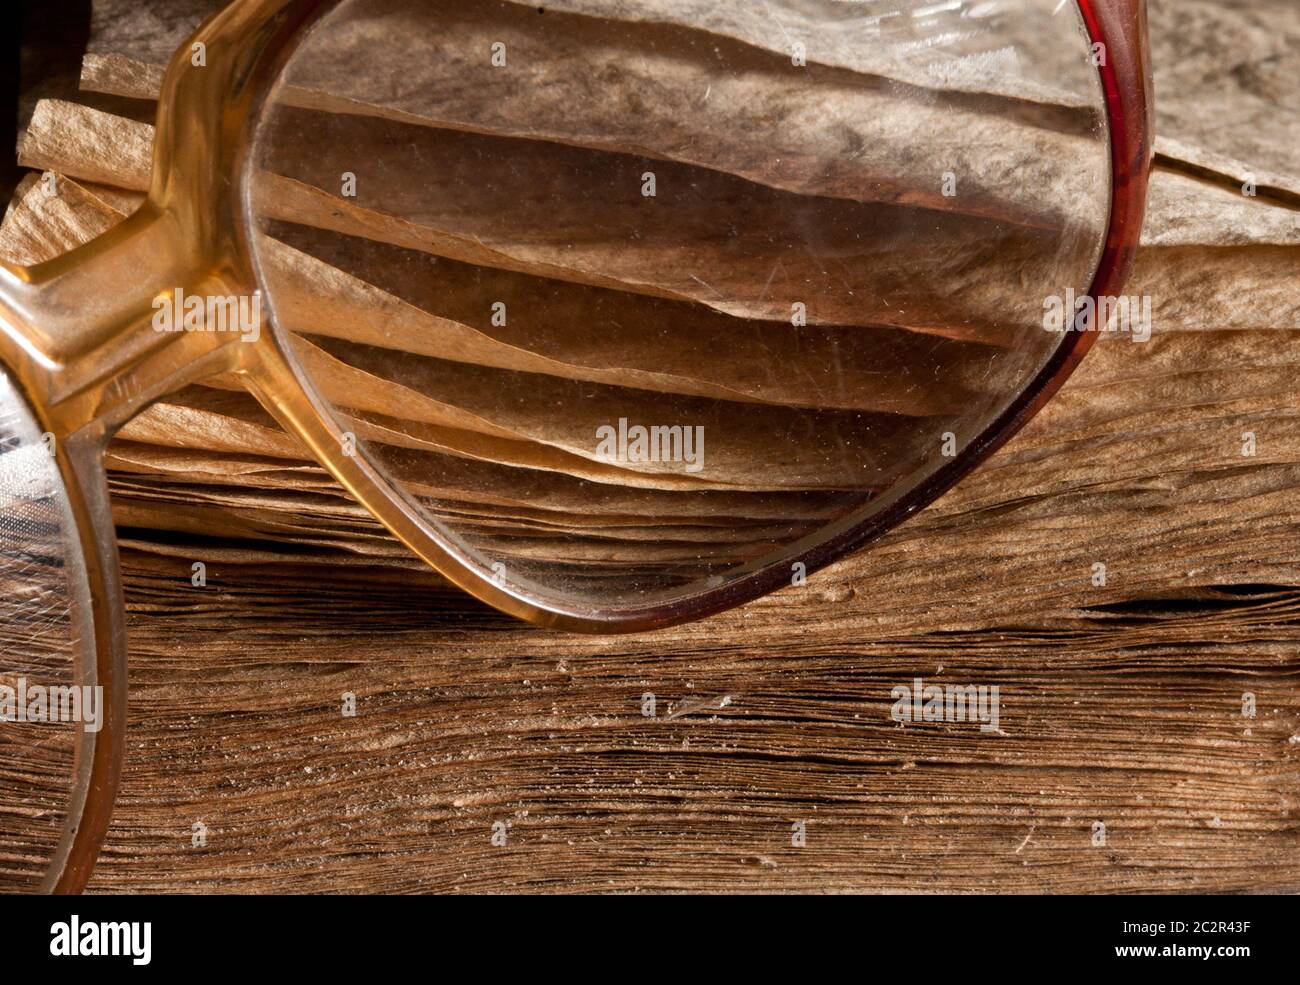 Antique glasses on old weathered book. Close-up view Stock Photo